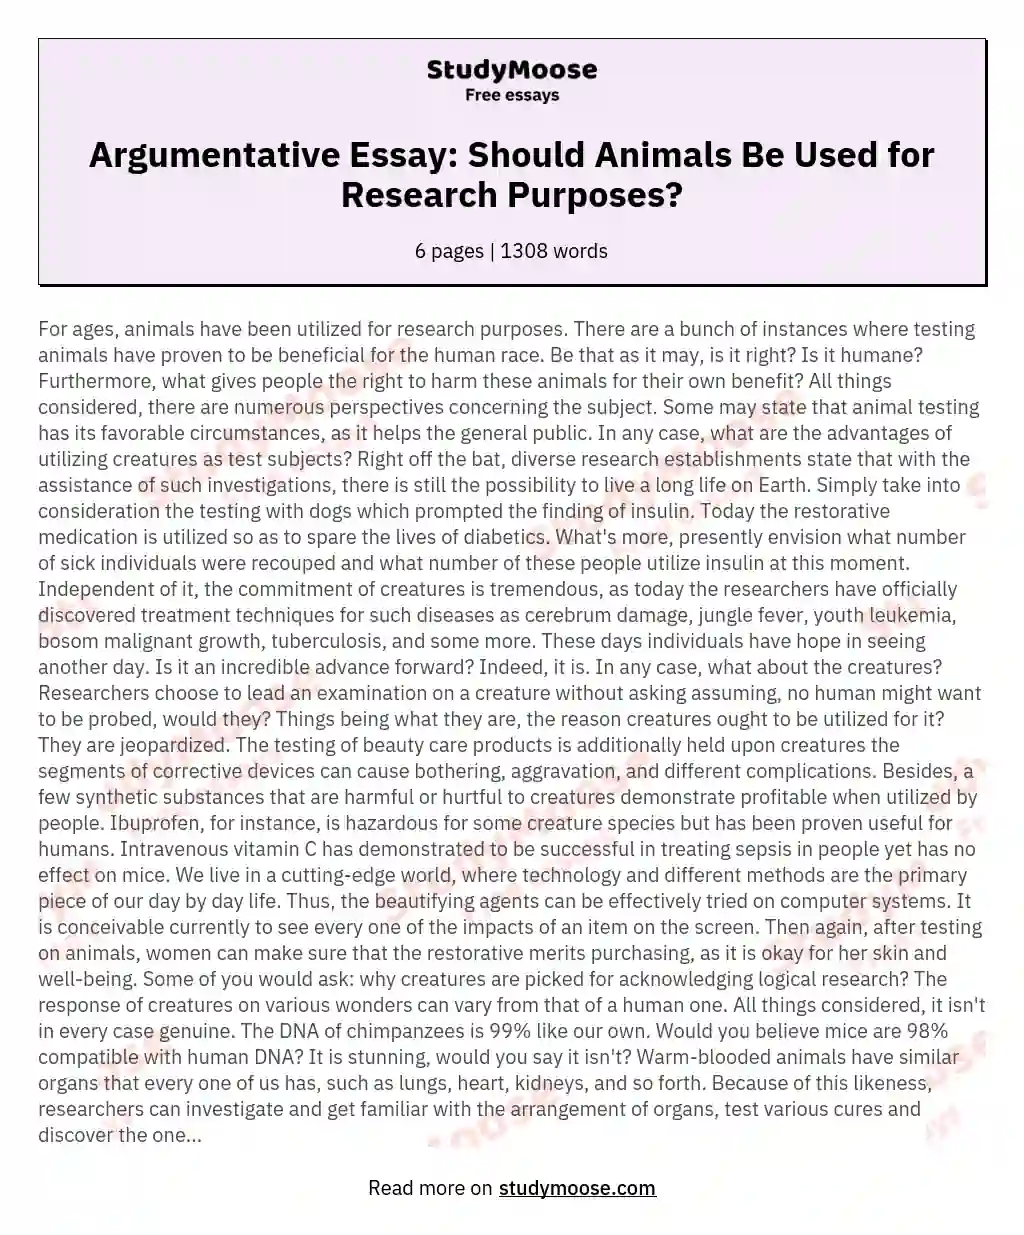 Argumentative Essay: Should Animals Be Used for Research Purposes?